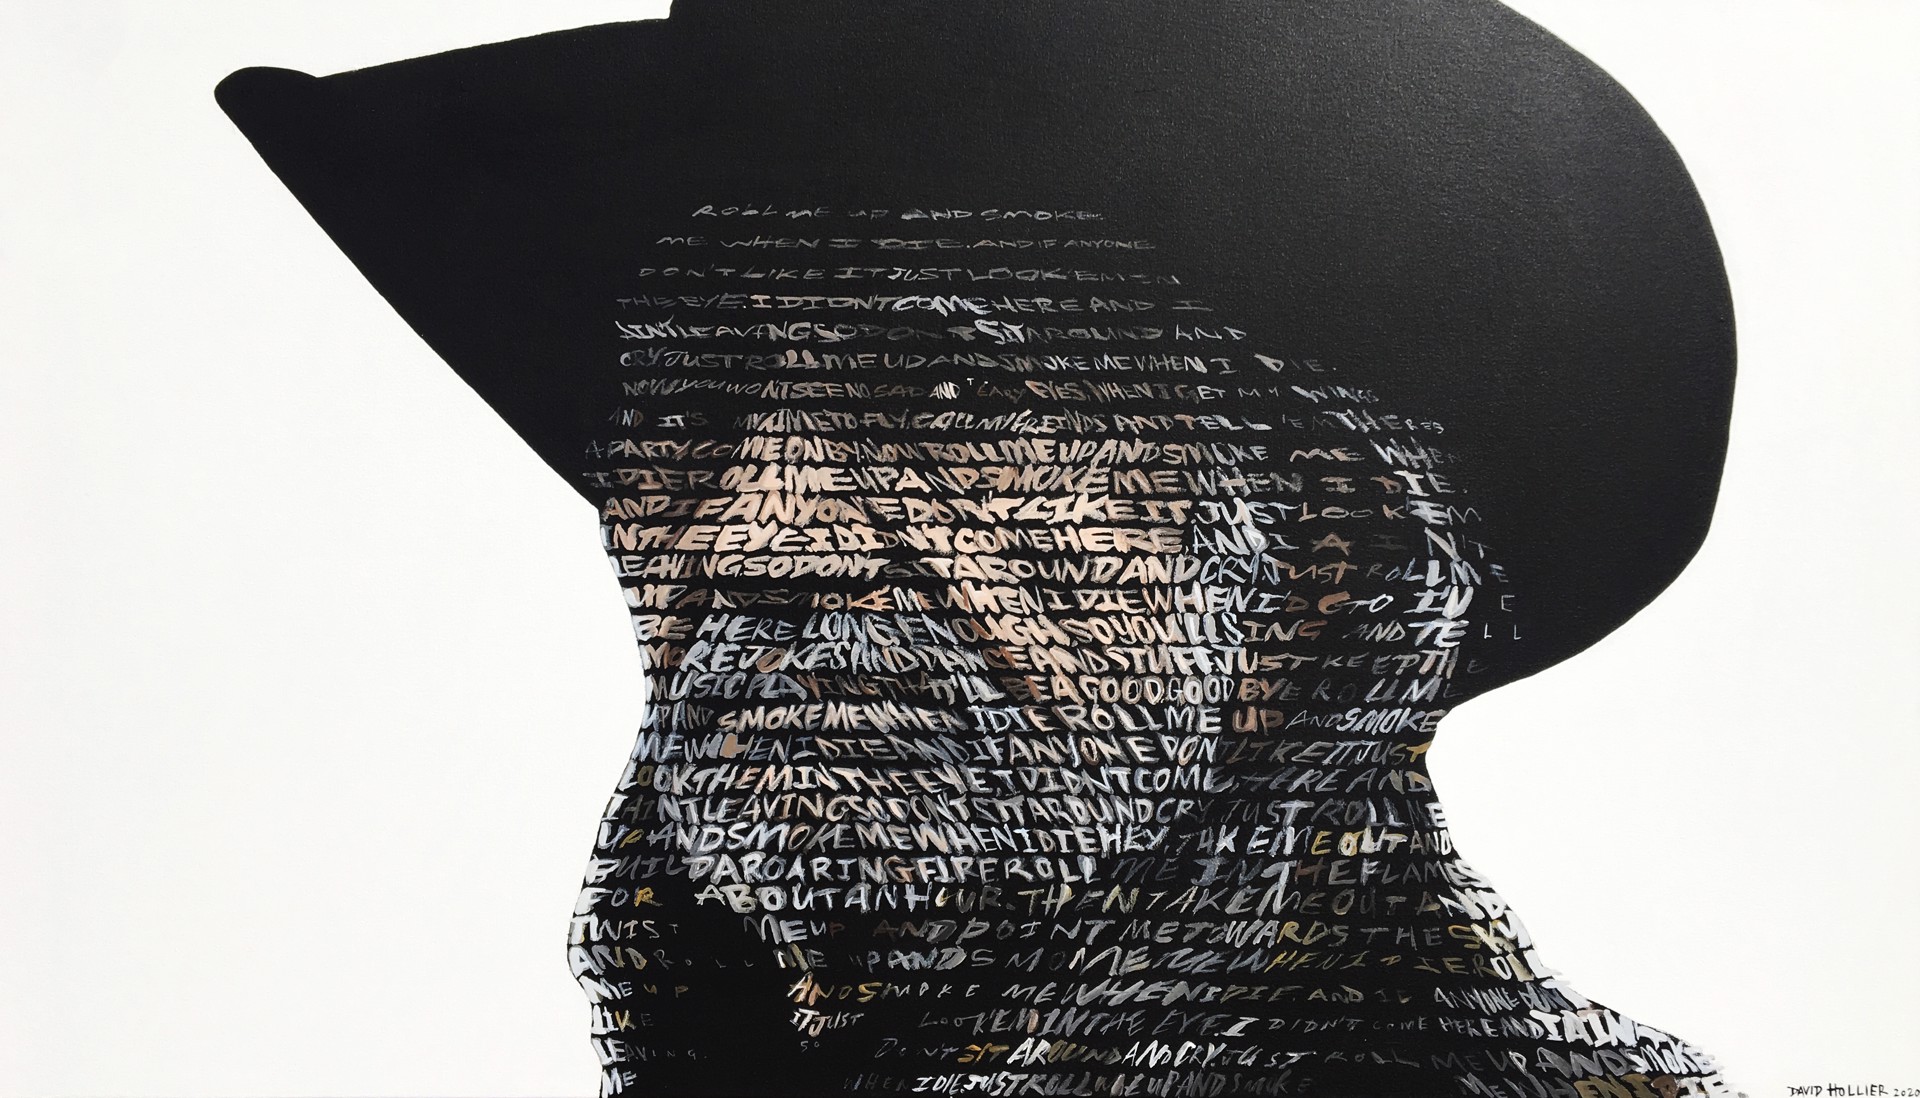 Willie Nelson (Text: Lyrics to Roll Me Up and Smoke Me When I Die) by David Hollier